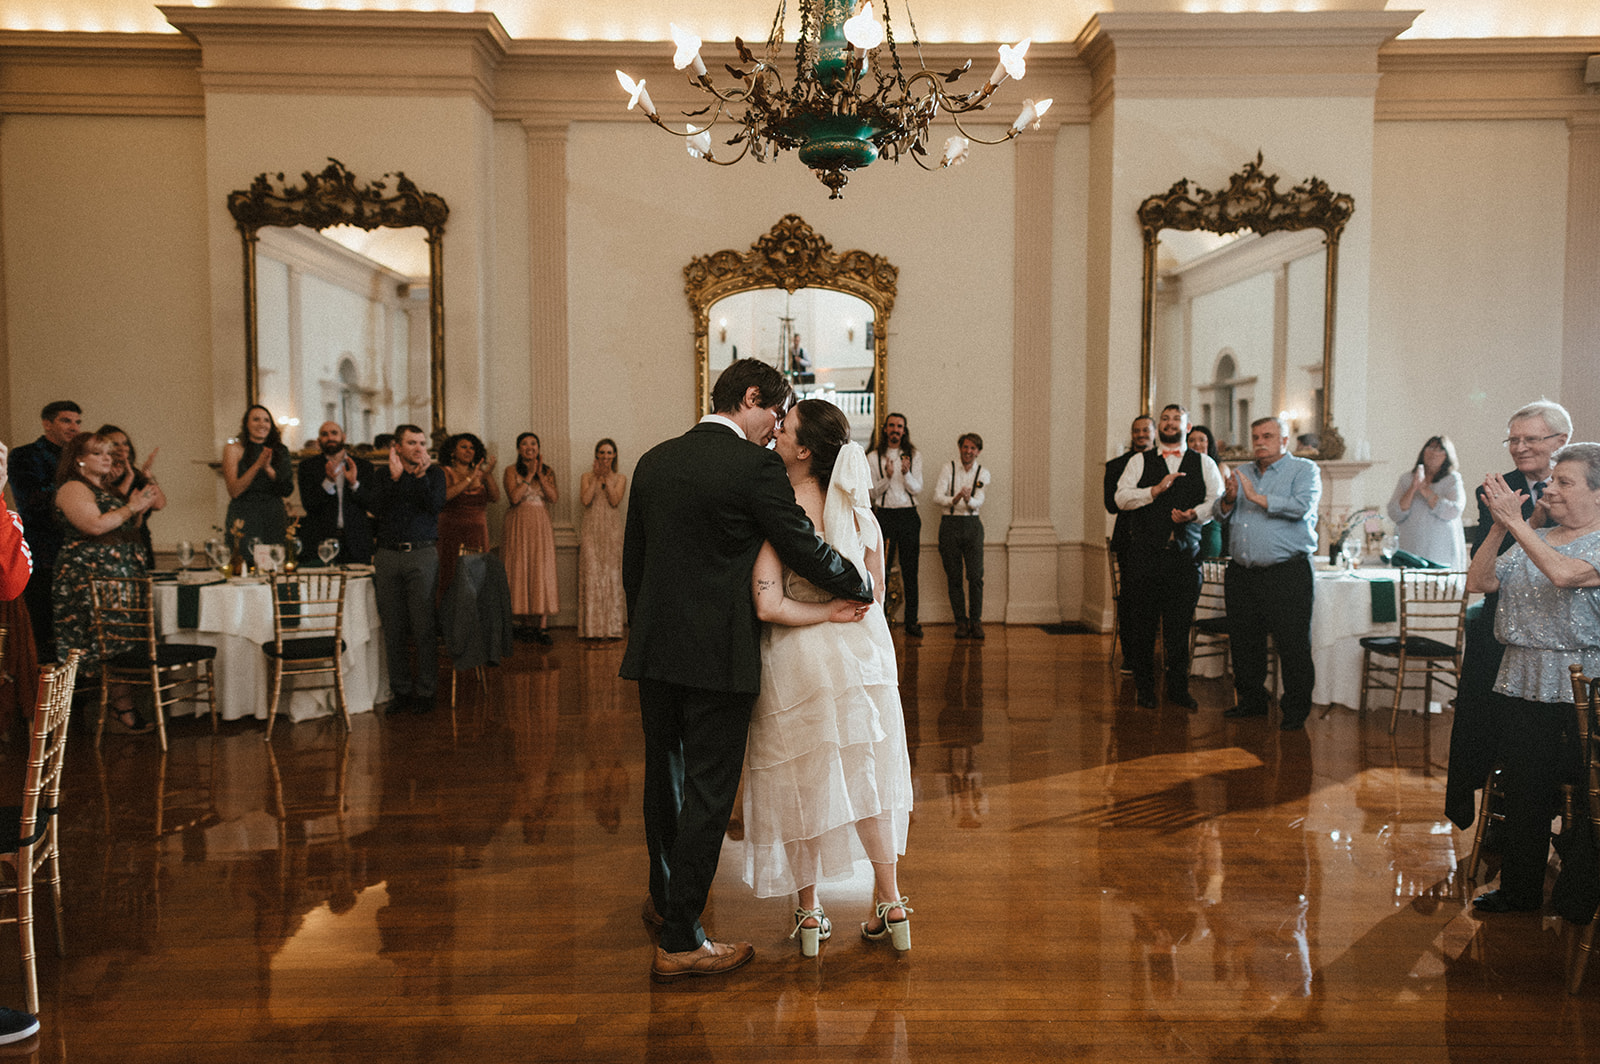 Bride and groom share first dance during wedding at Salem's Hamilton Hall